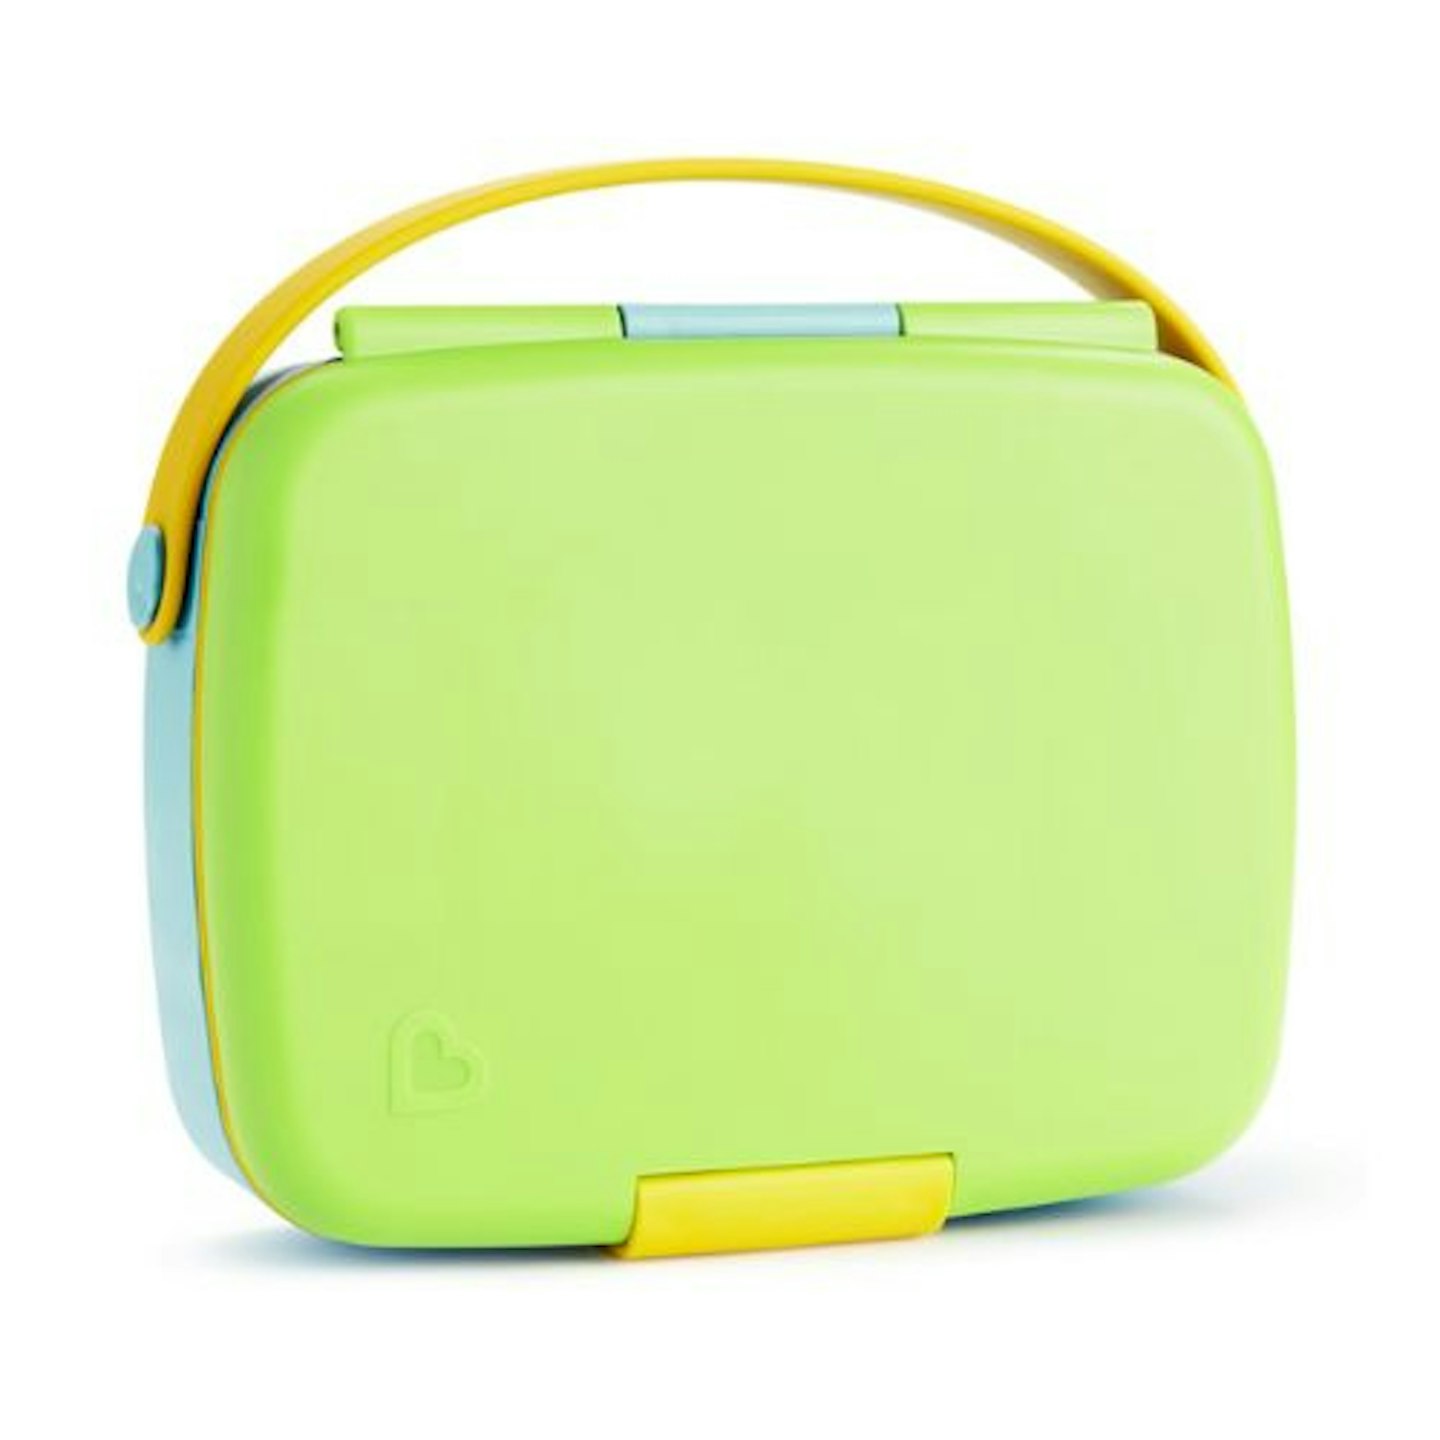 best back to school essentials shopping guide bento lunchbox